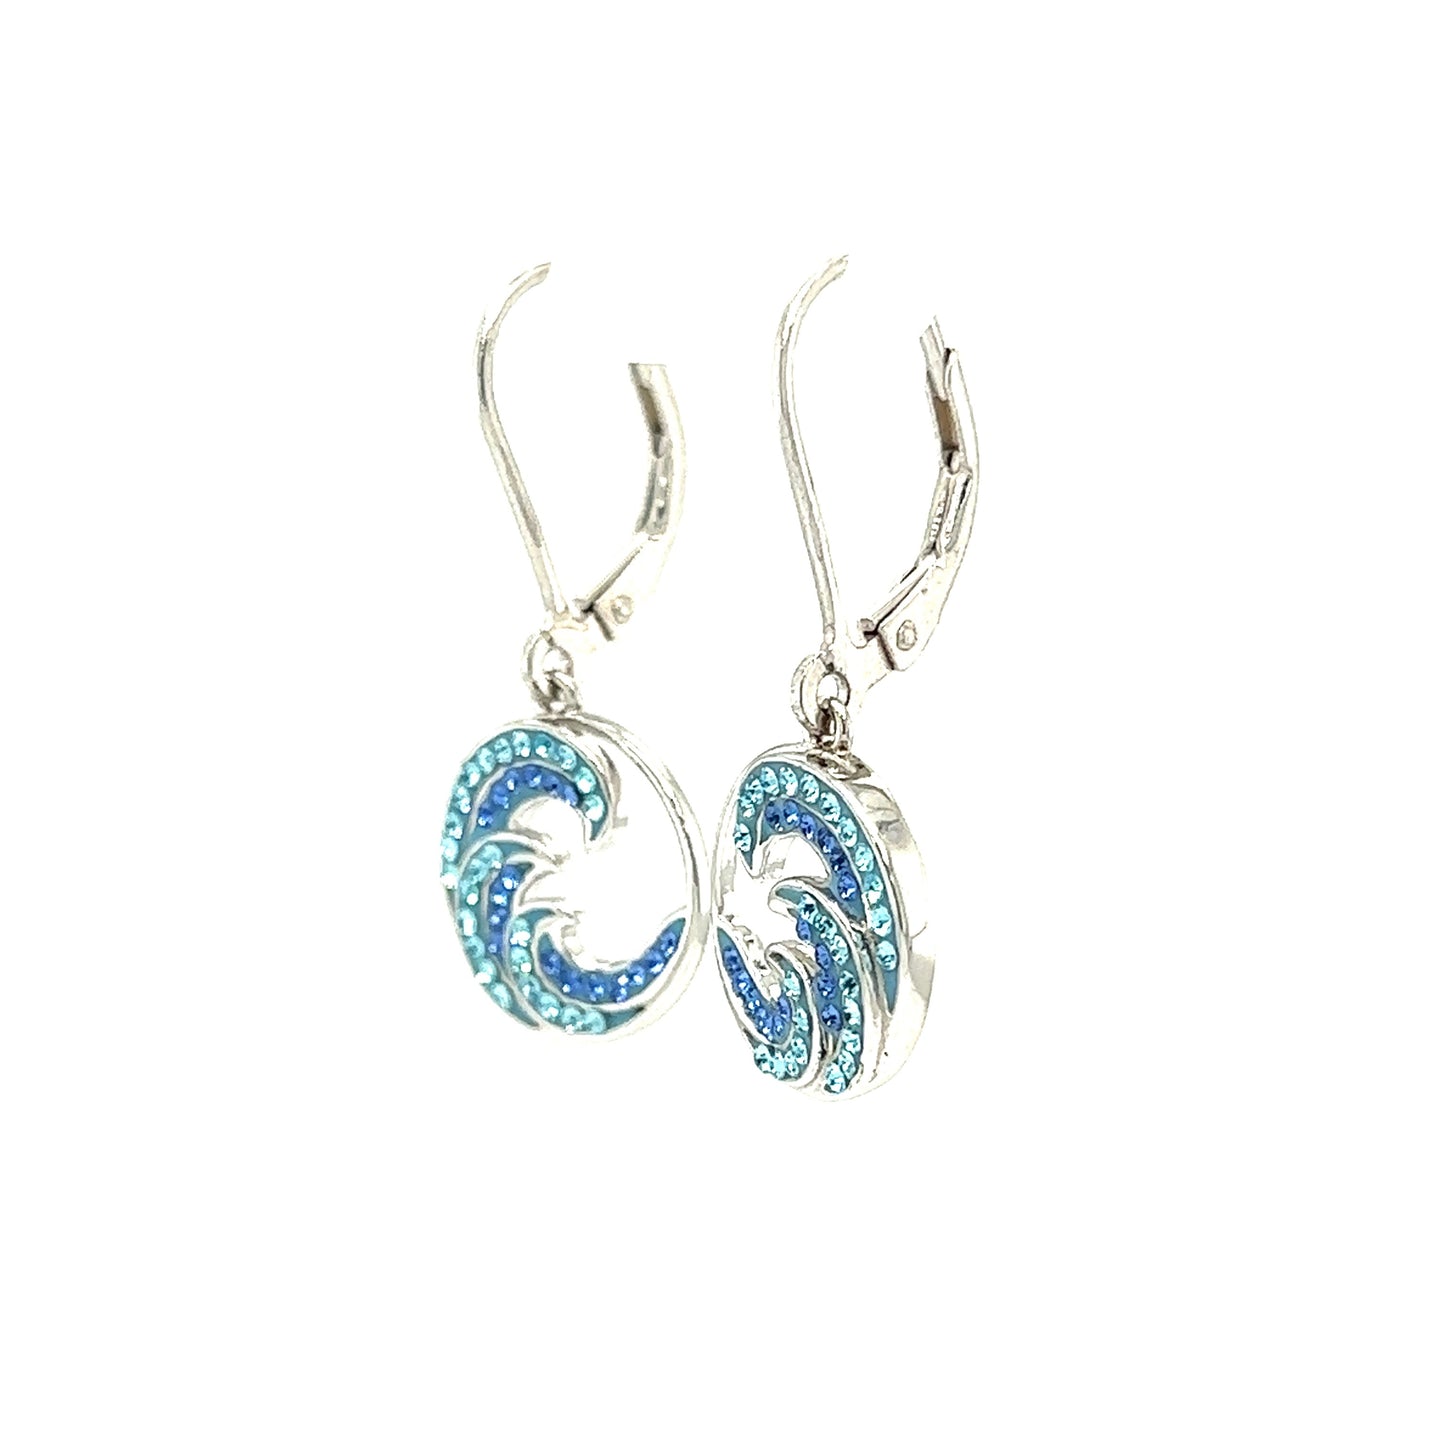 Wave Dangle Earrings with Blue and Aqua Crystals in Sterling Silver Right Side View